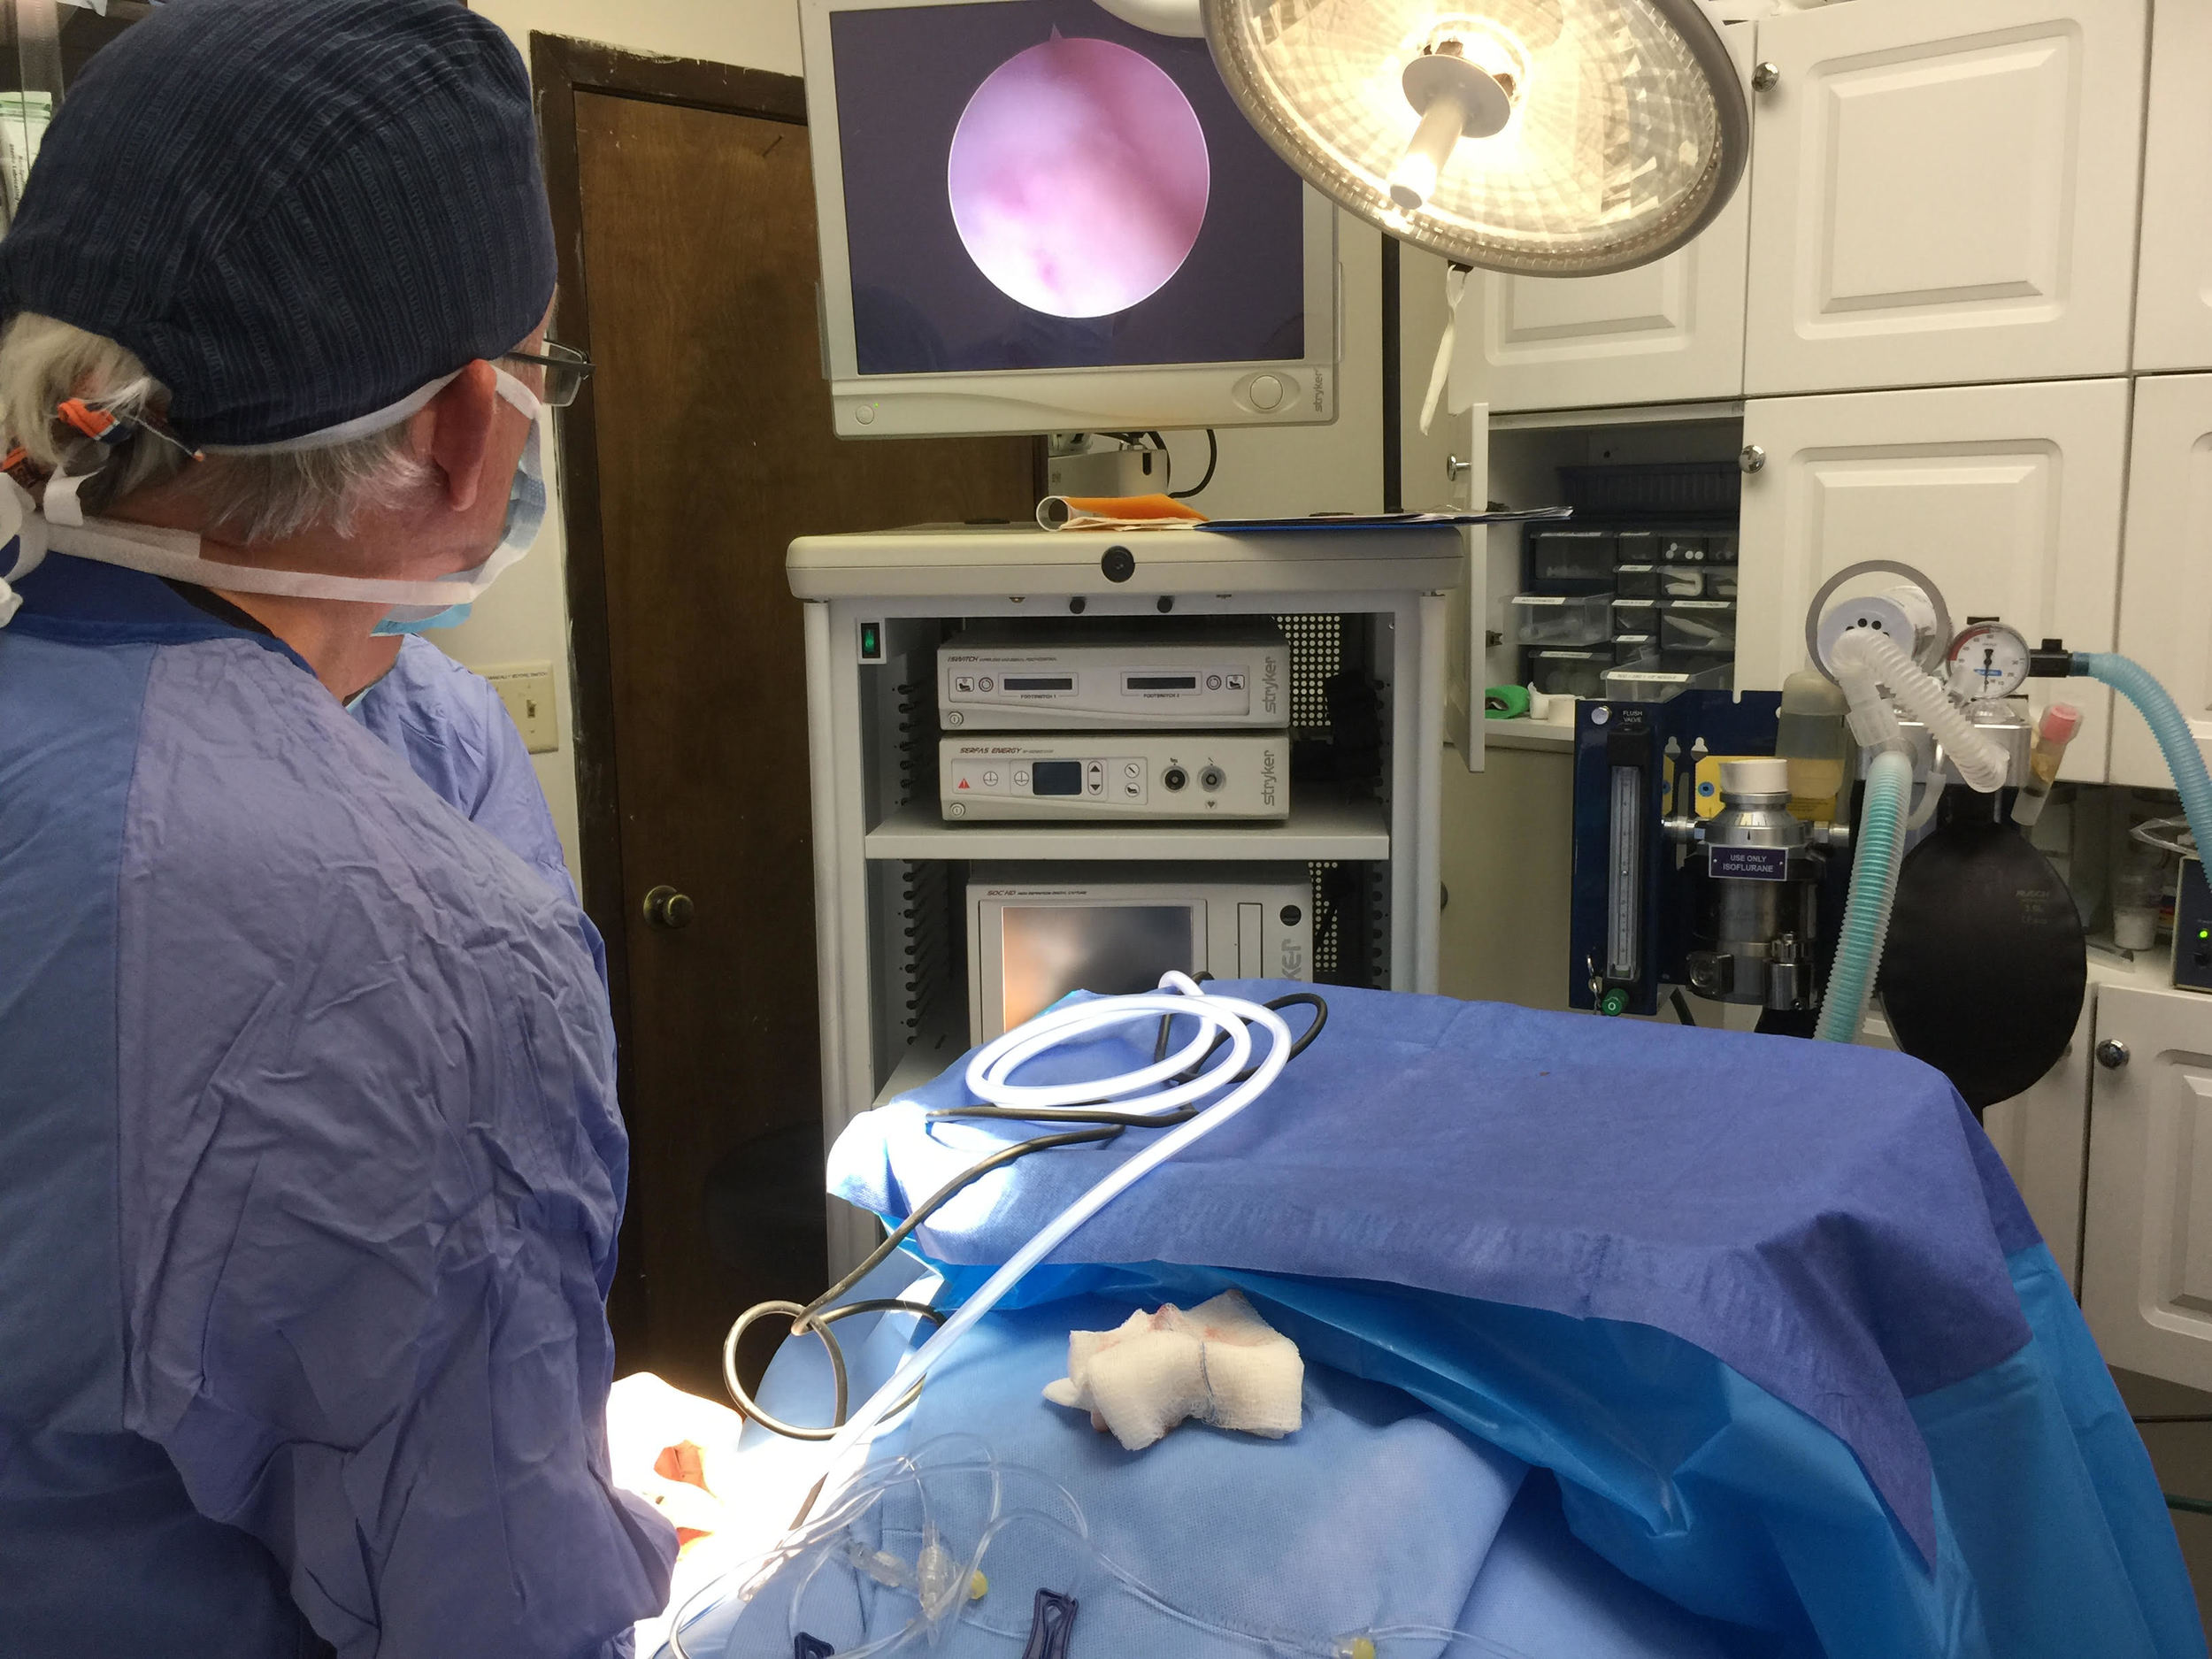  Dr. Monty in surgery using the arthroscope. 